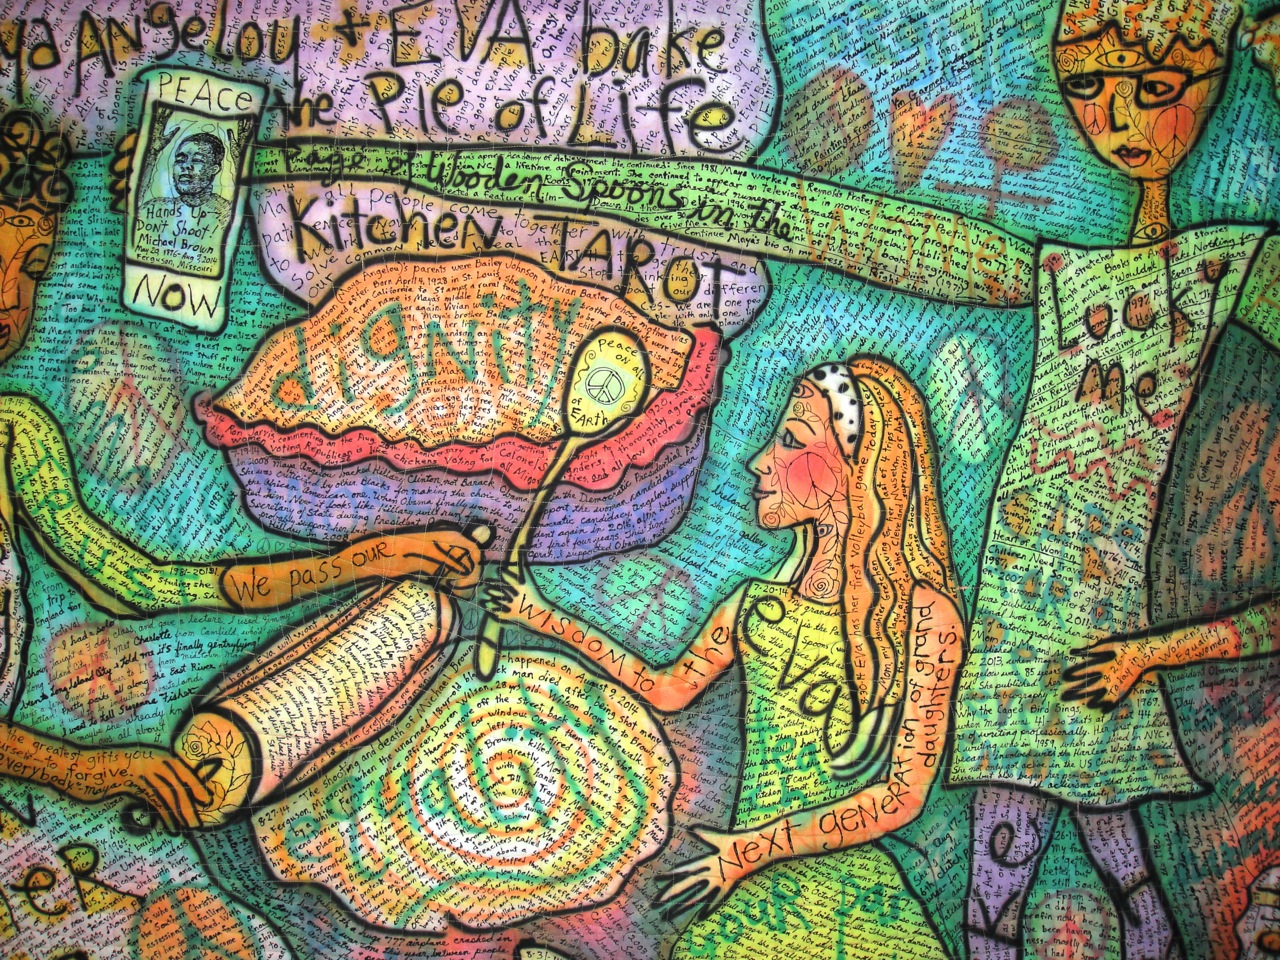 The Pie of Life. detail. ©Susan Shie 2014